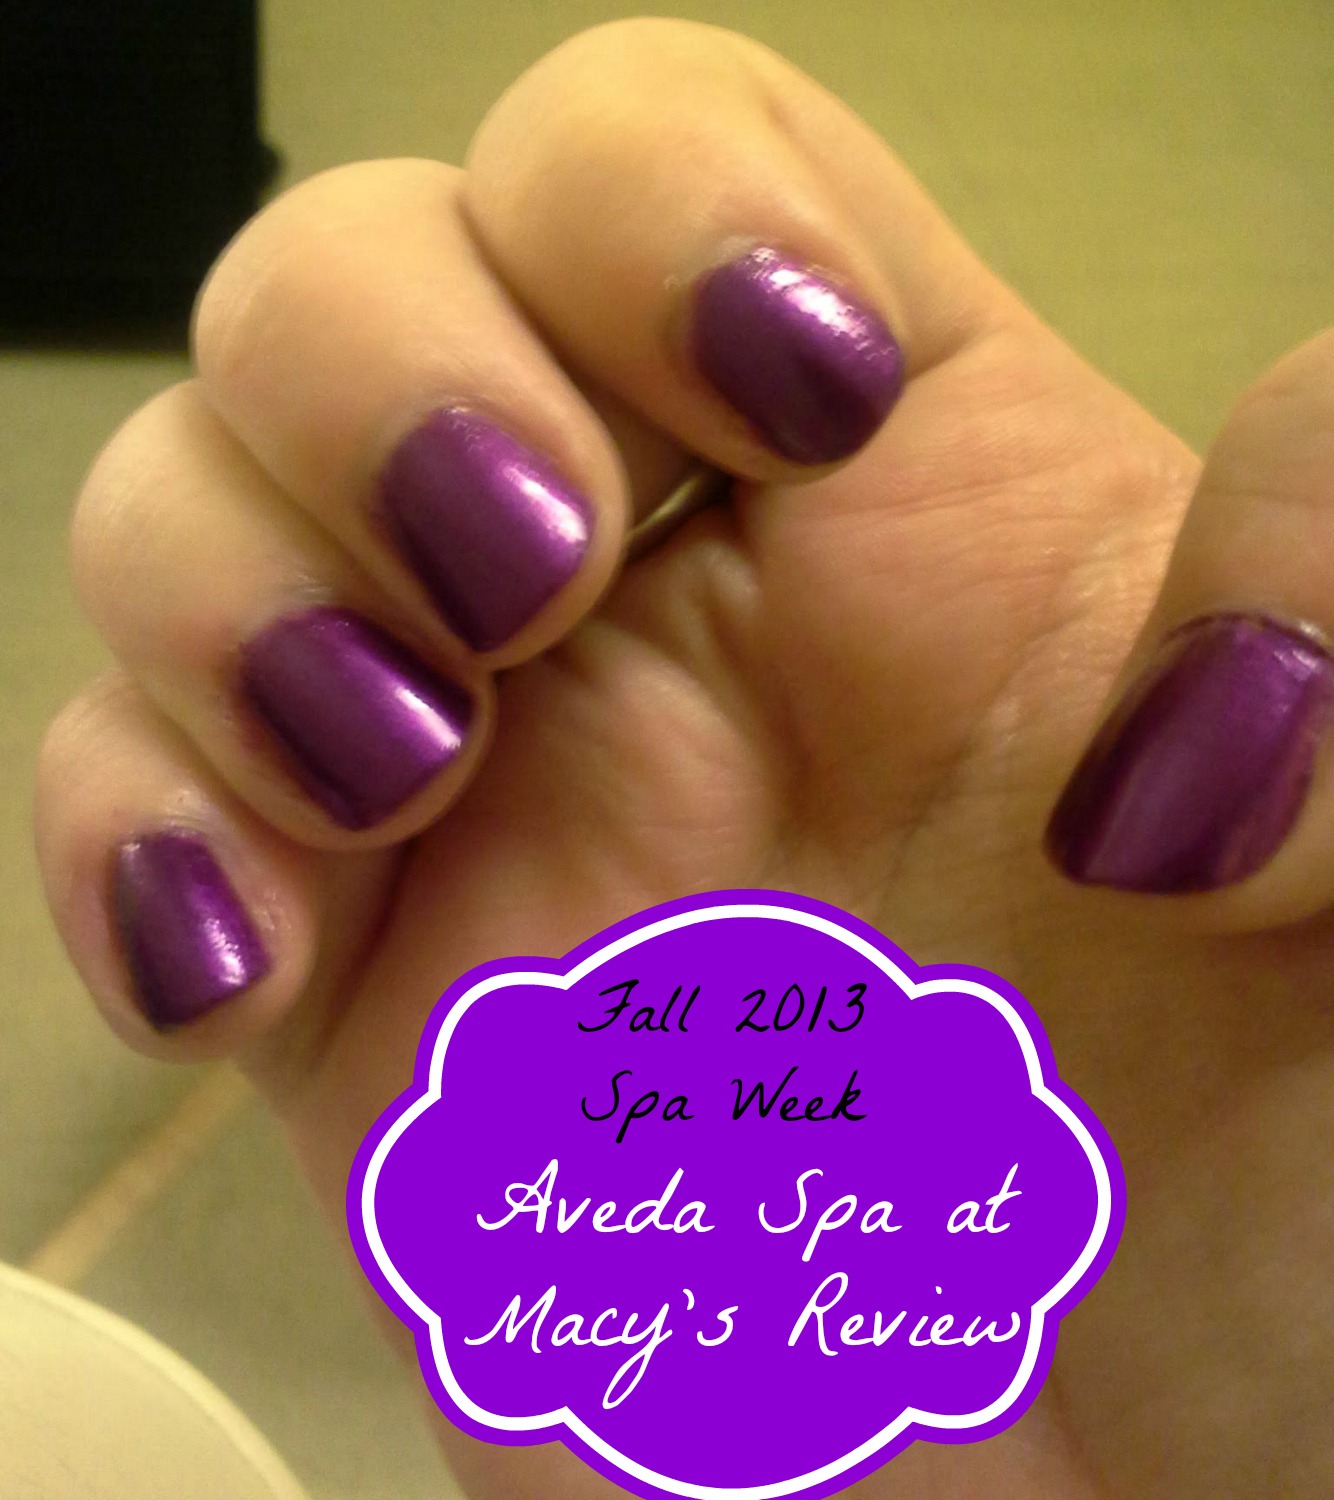 Manicure I Received at Aveda Spa and Salon at Macy's for Fall 2013 Spa Week | Optimistic Mommy